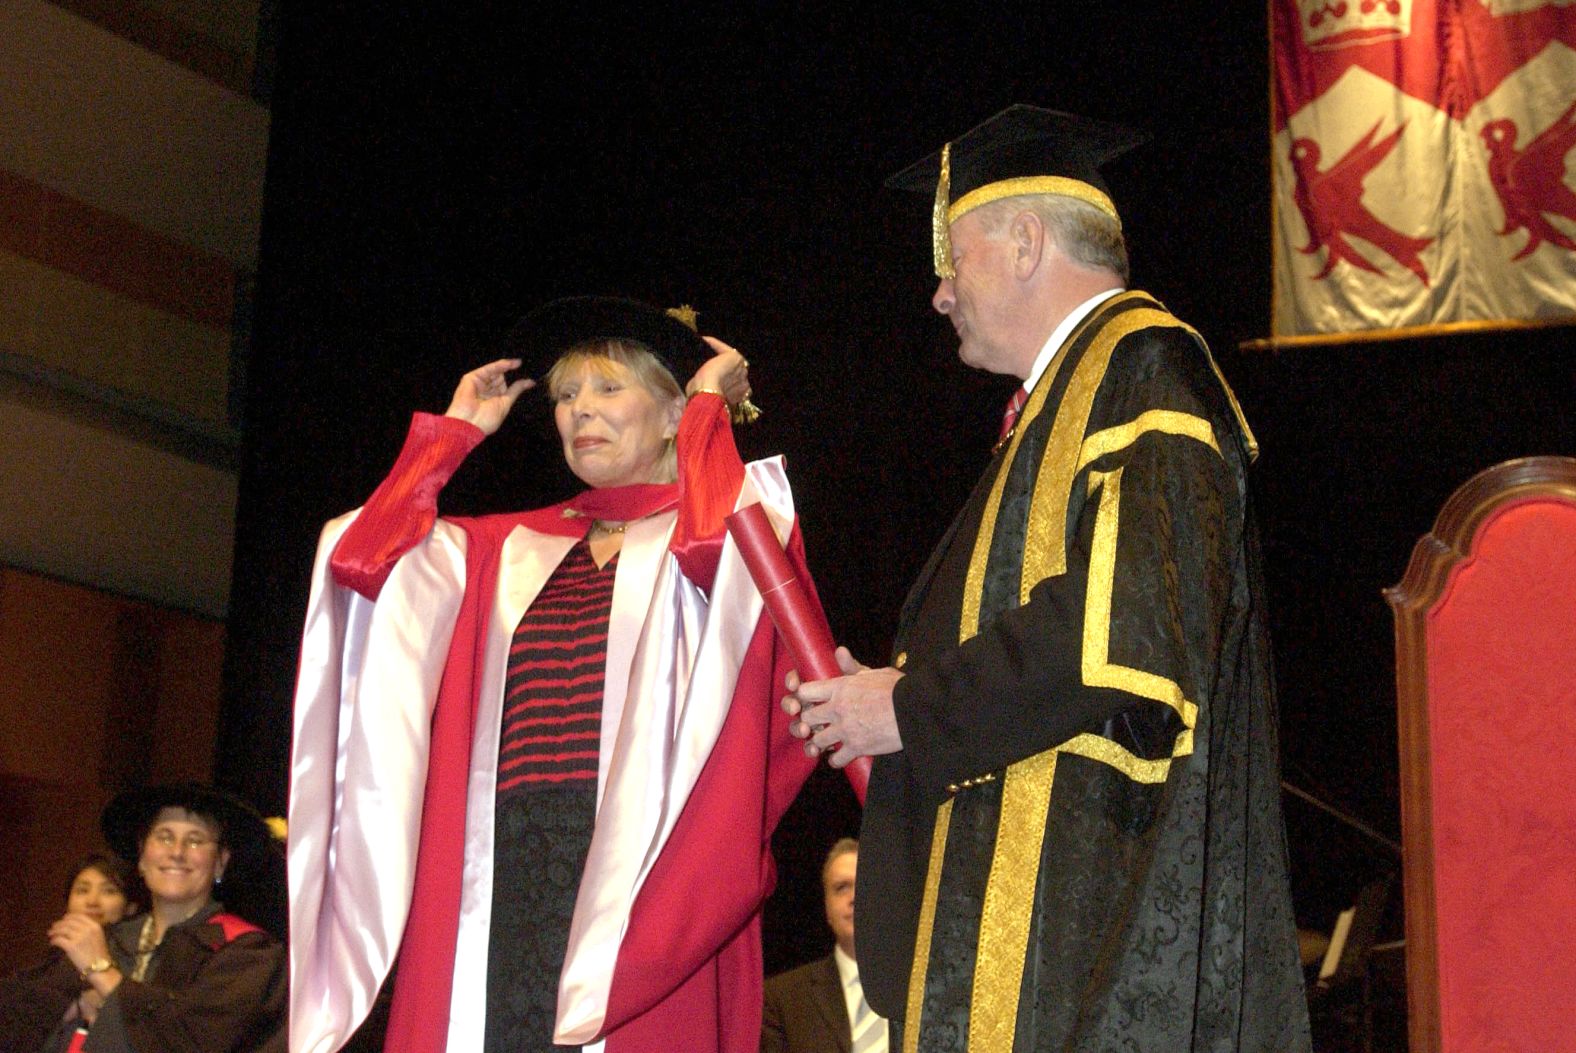 Mitchell receives an honorary degree from McGill University in Montreal, Canada, in 2004.